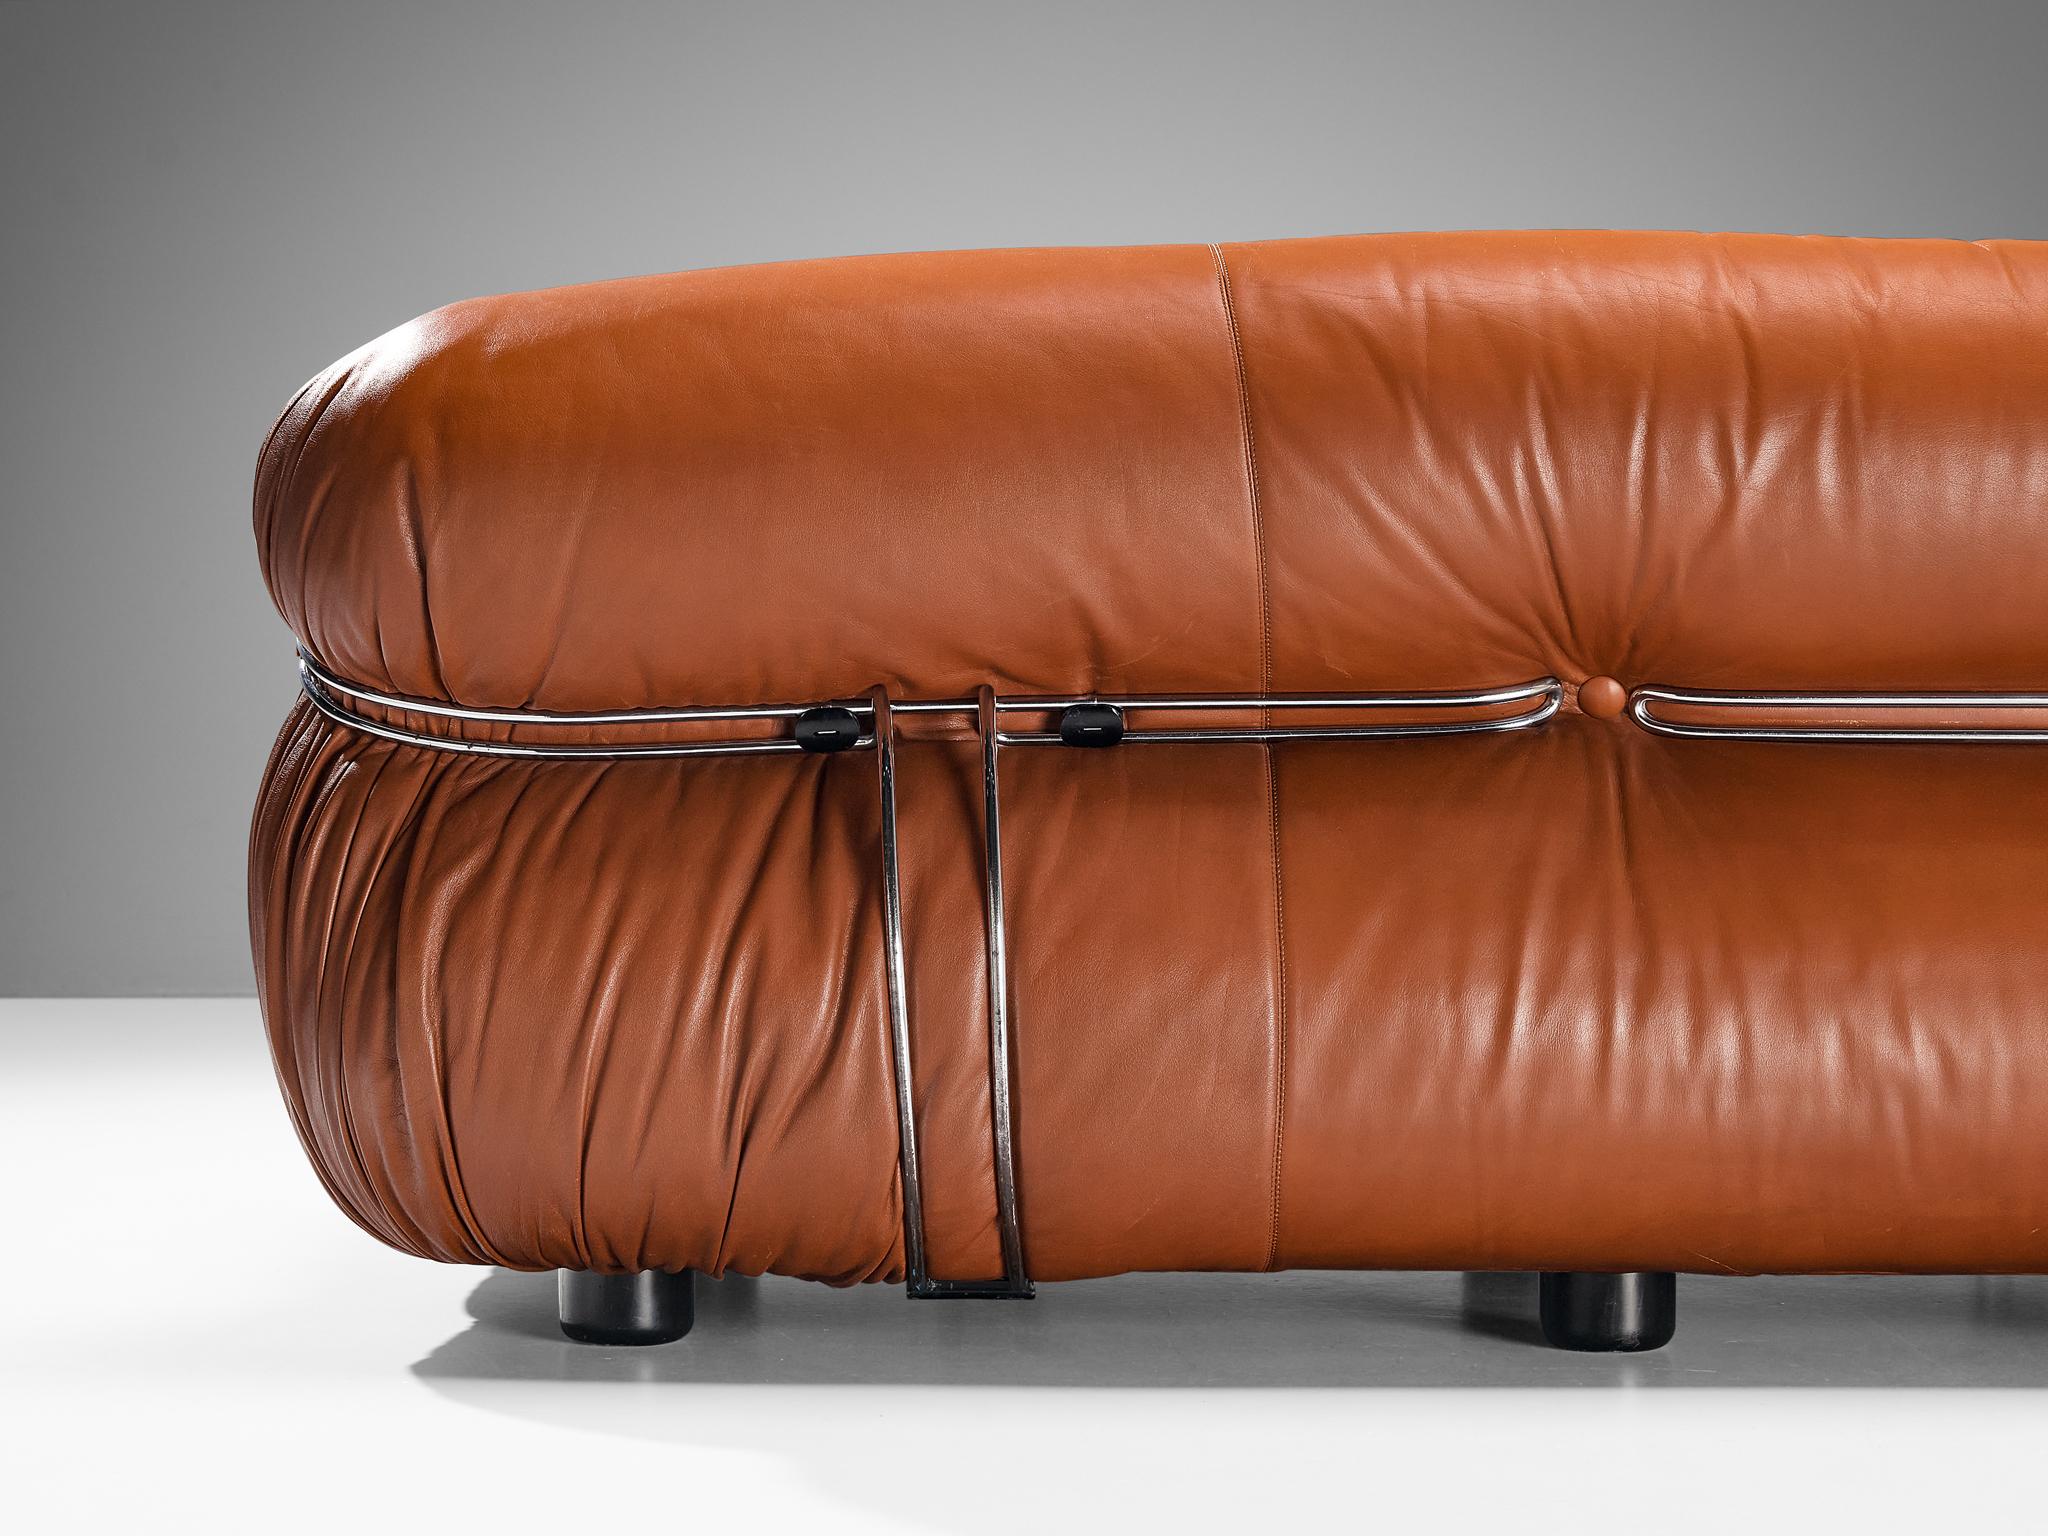 Afra & Tobia Scarpa 'Soriana' Sofa in Patinated Brown Leather 2